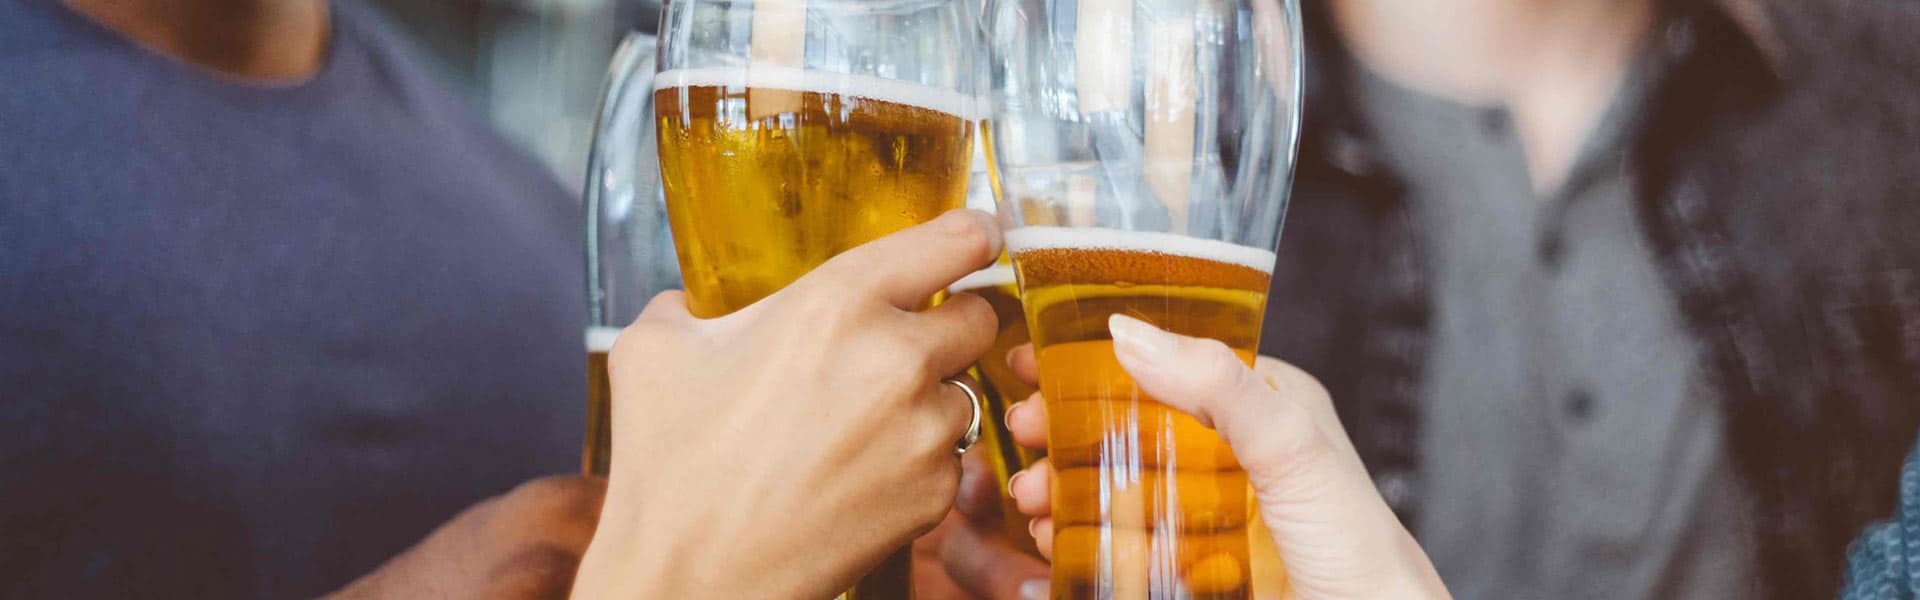 Beer with a Purpose: Quartiermeister Chooses SAP Business One